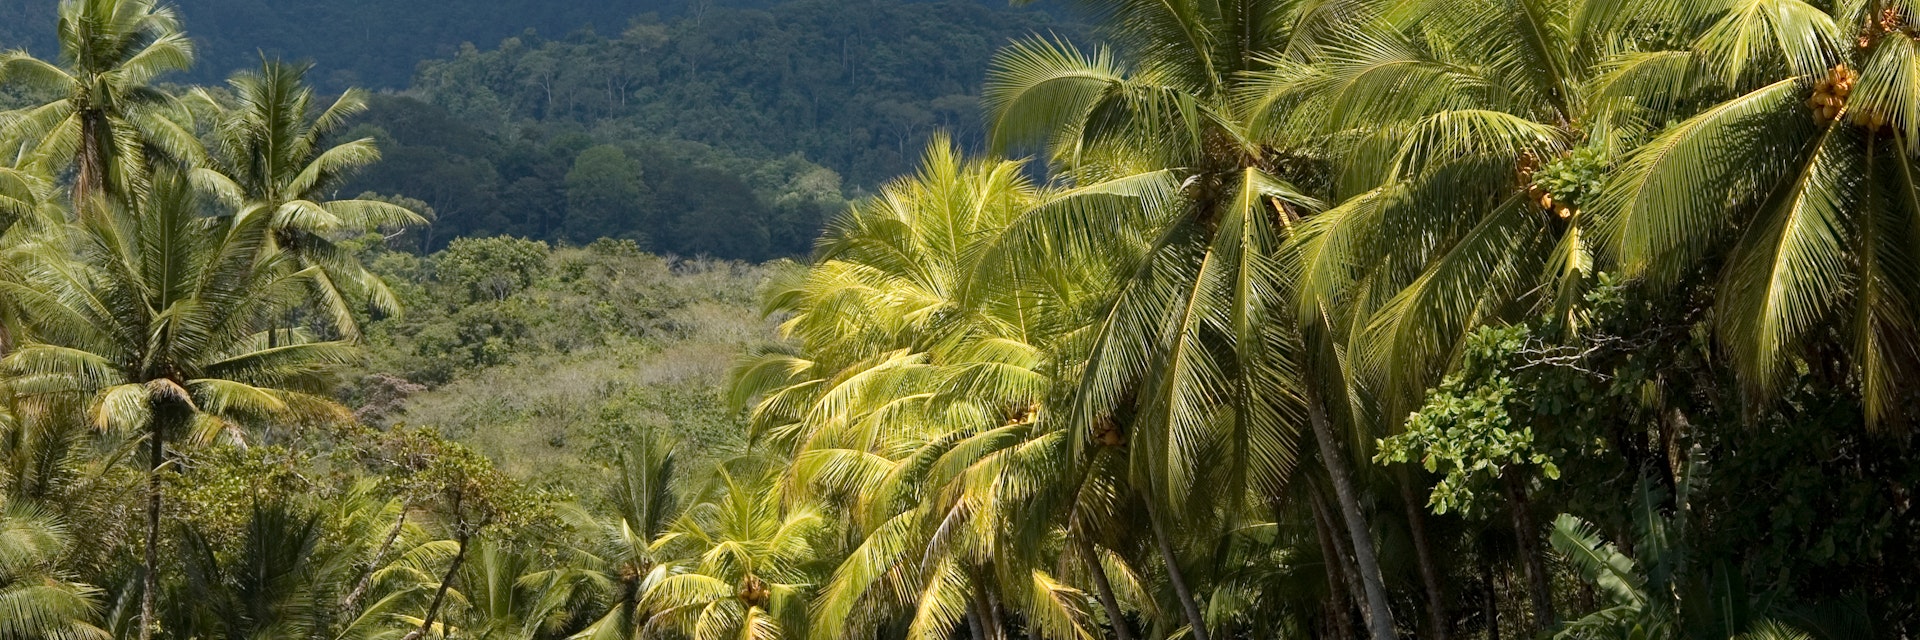 Landscape with palm trees, South Costa Rica, near Ojochal. Central America.; Shutterstock ID 1612848757; your: Erin Lenczycki; gl: 65050; netsuite: Online Editorial; full: Destination update